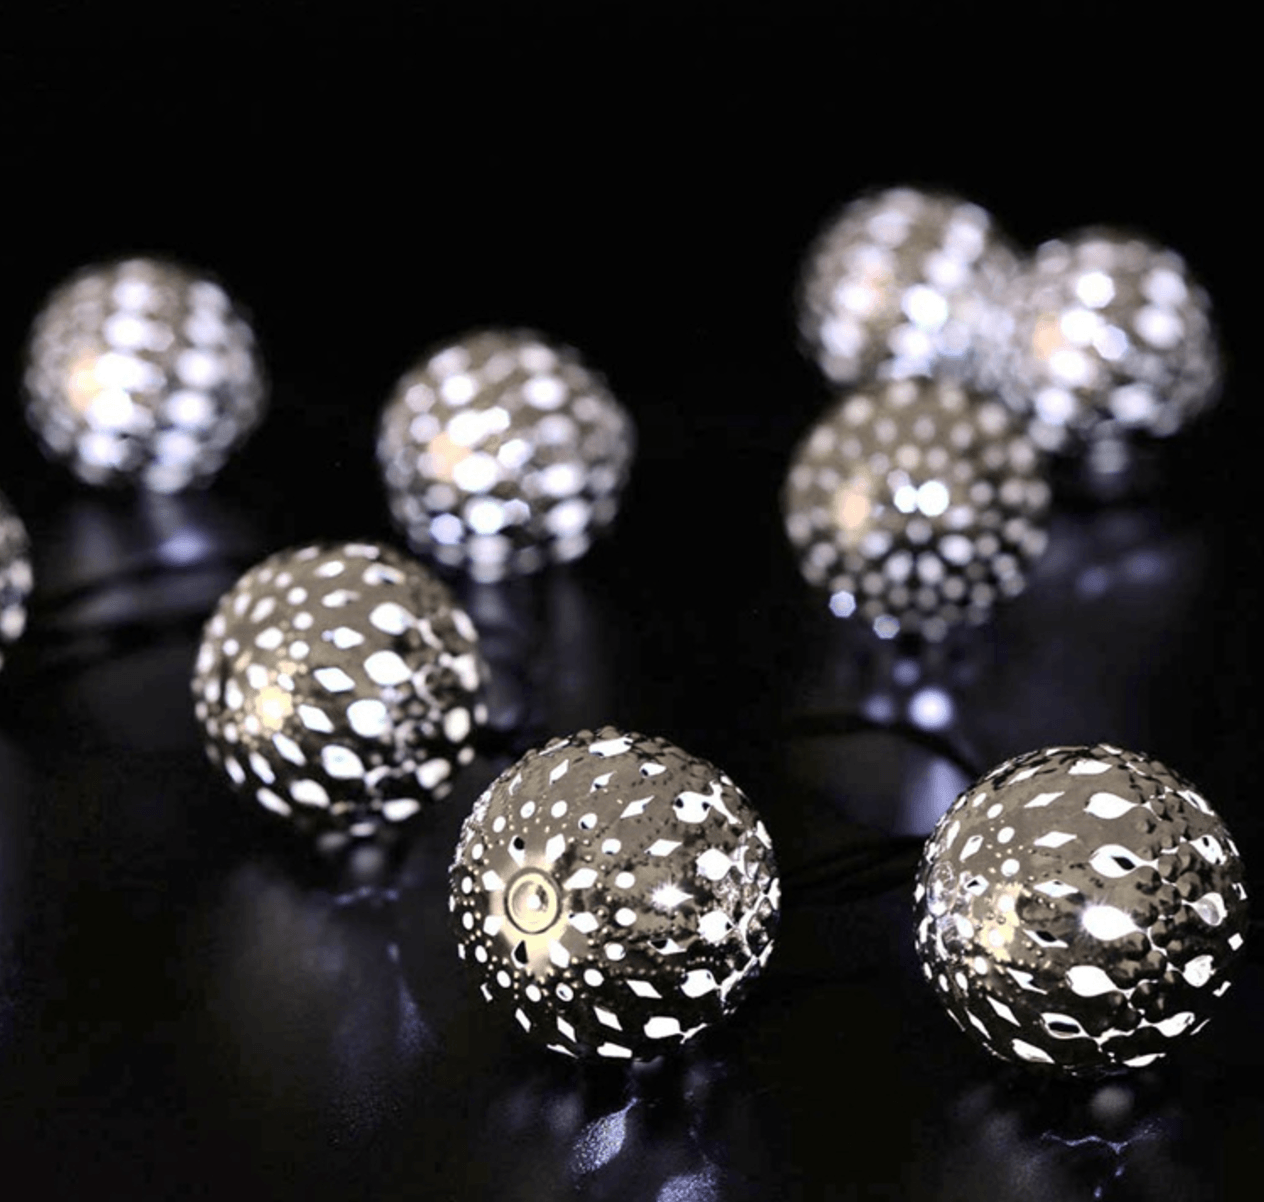 Morrocan Balls Metal Light String with 10 Silver Ball & White LED Lights (1.3 m)